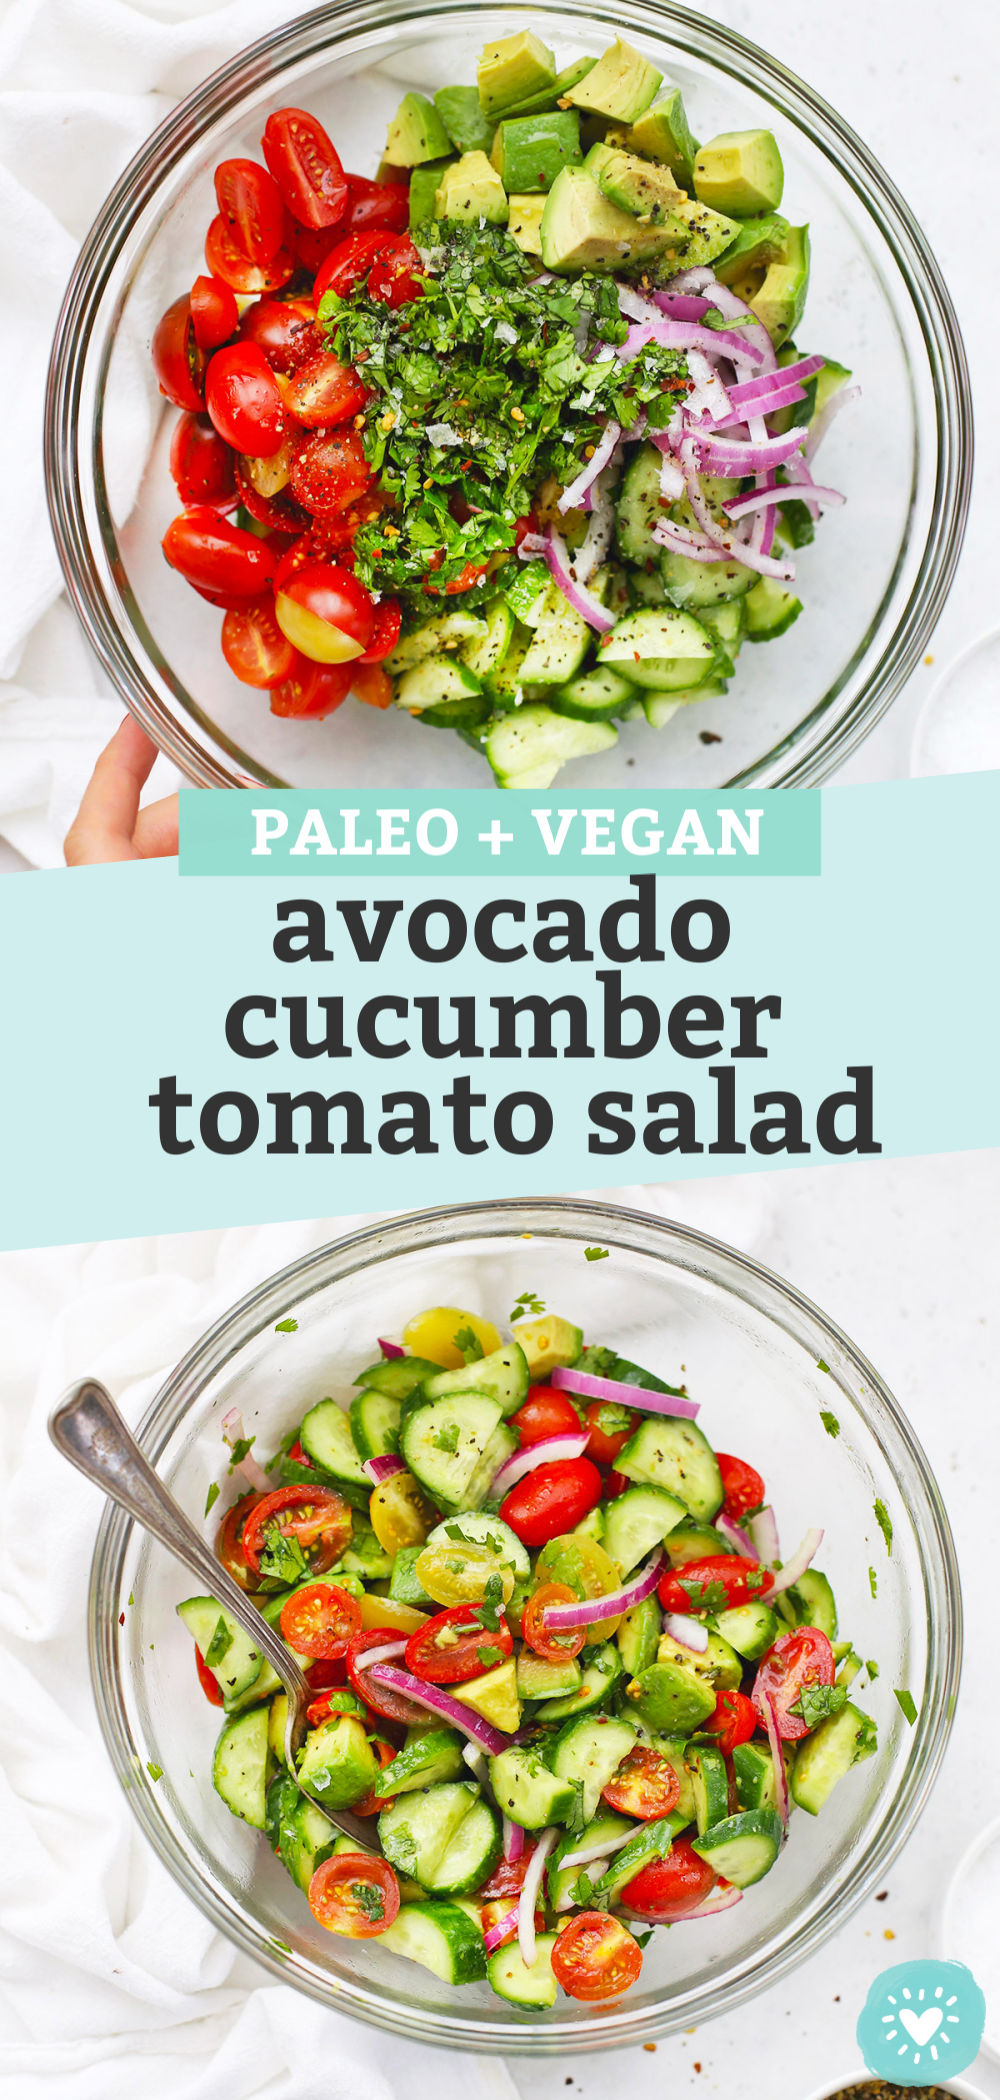 Collage of images of avocado cucumber tomato salad with text overlay that reads "Vegan + Paleo avocado cucumber tomato salad."